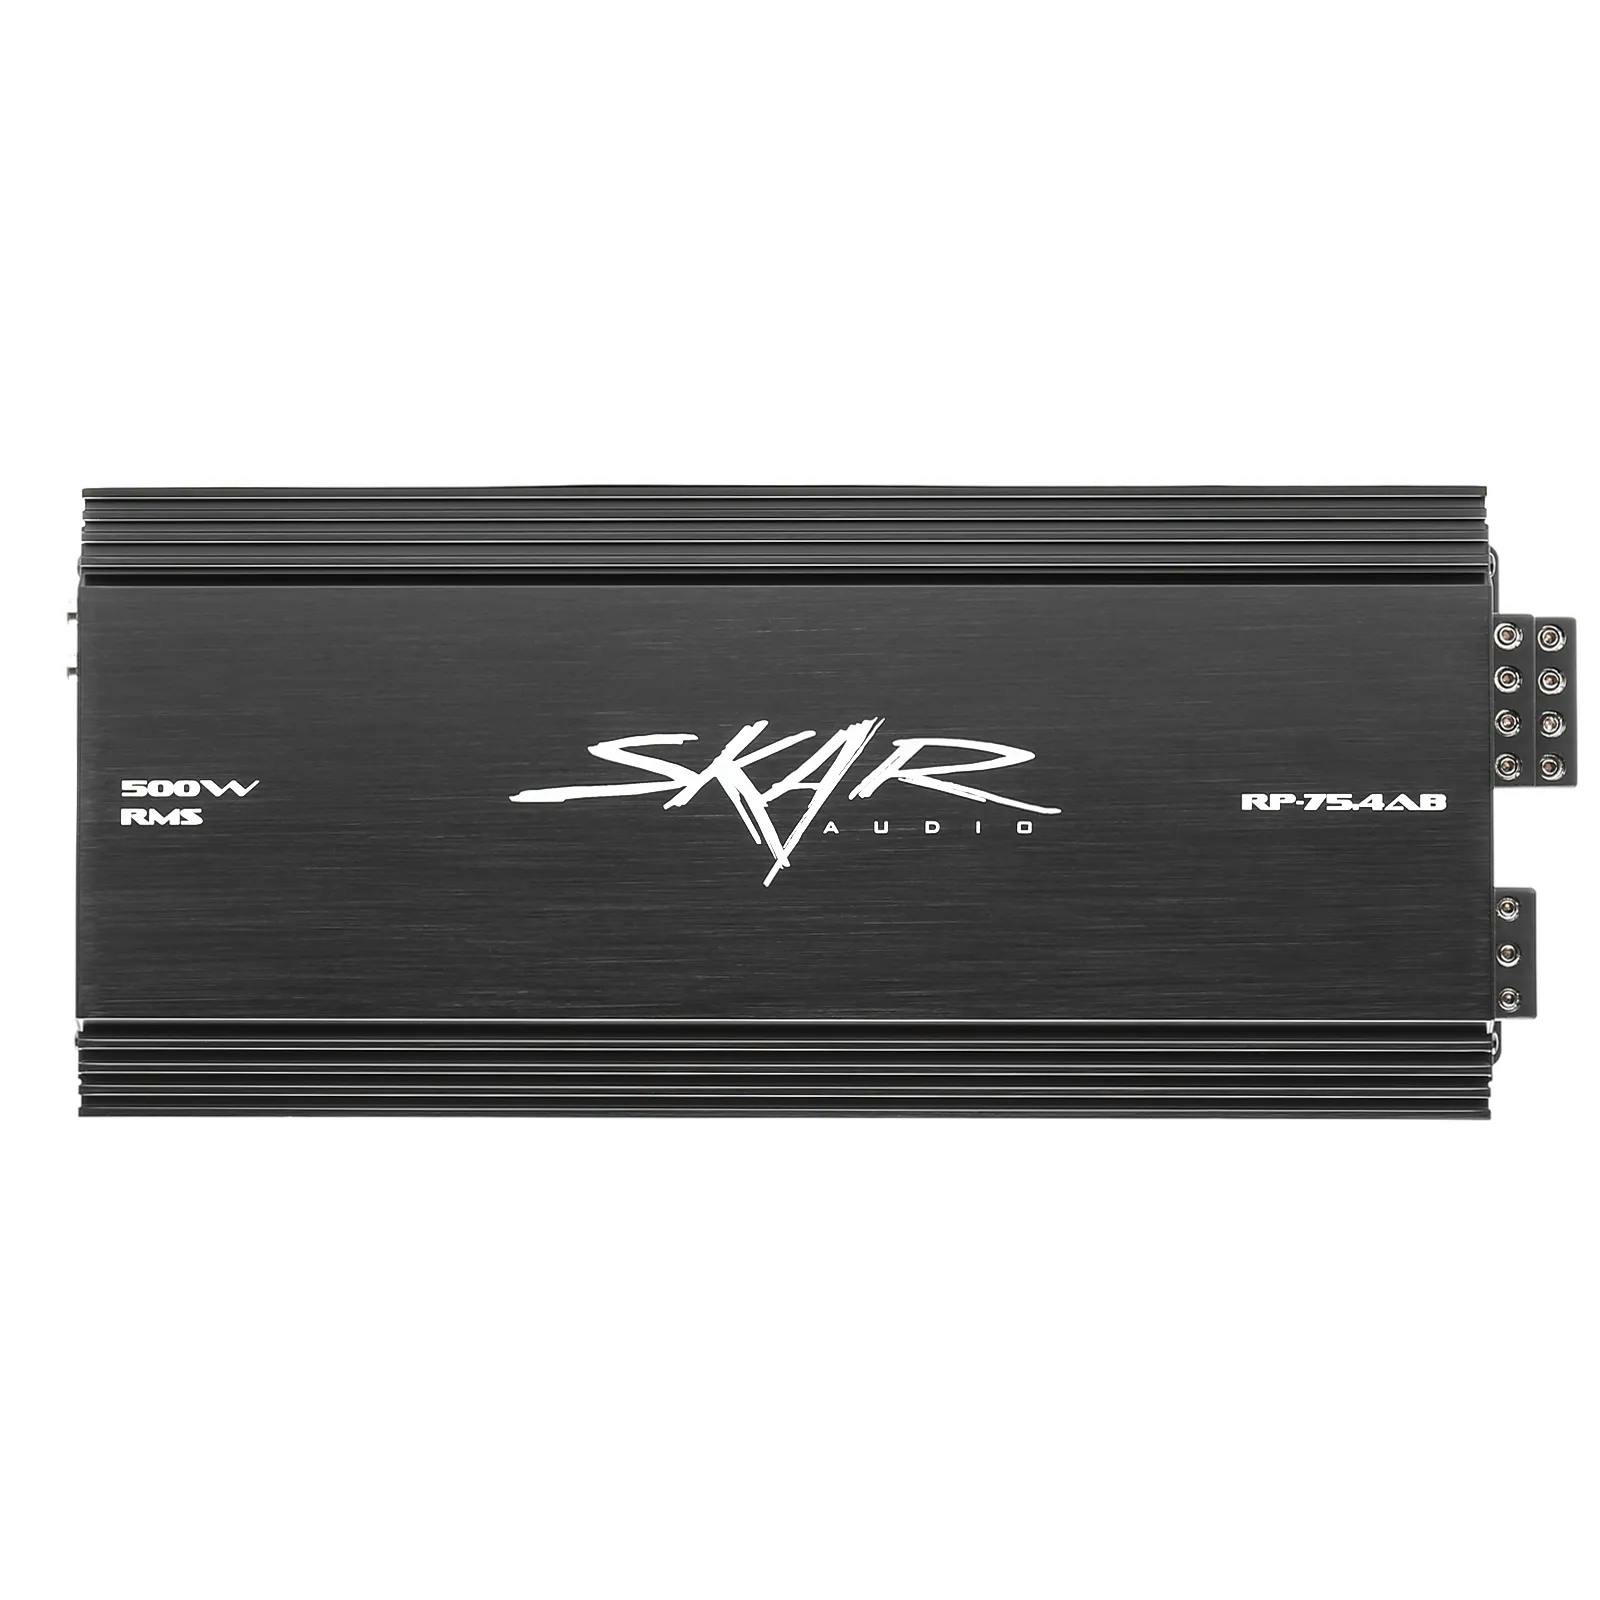 Featured Product Photo for RP-75.4AB | 500 Watt 4-Channel Car Amplifier